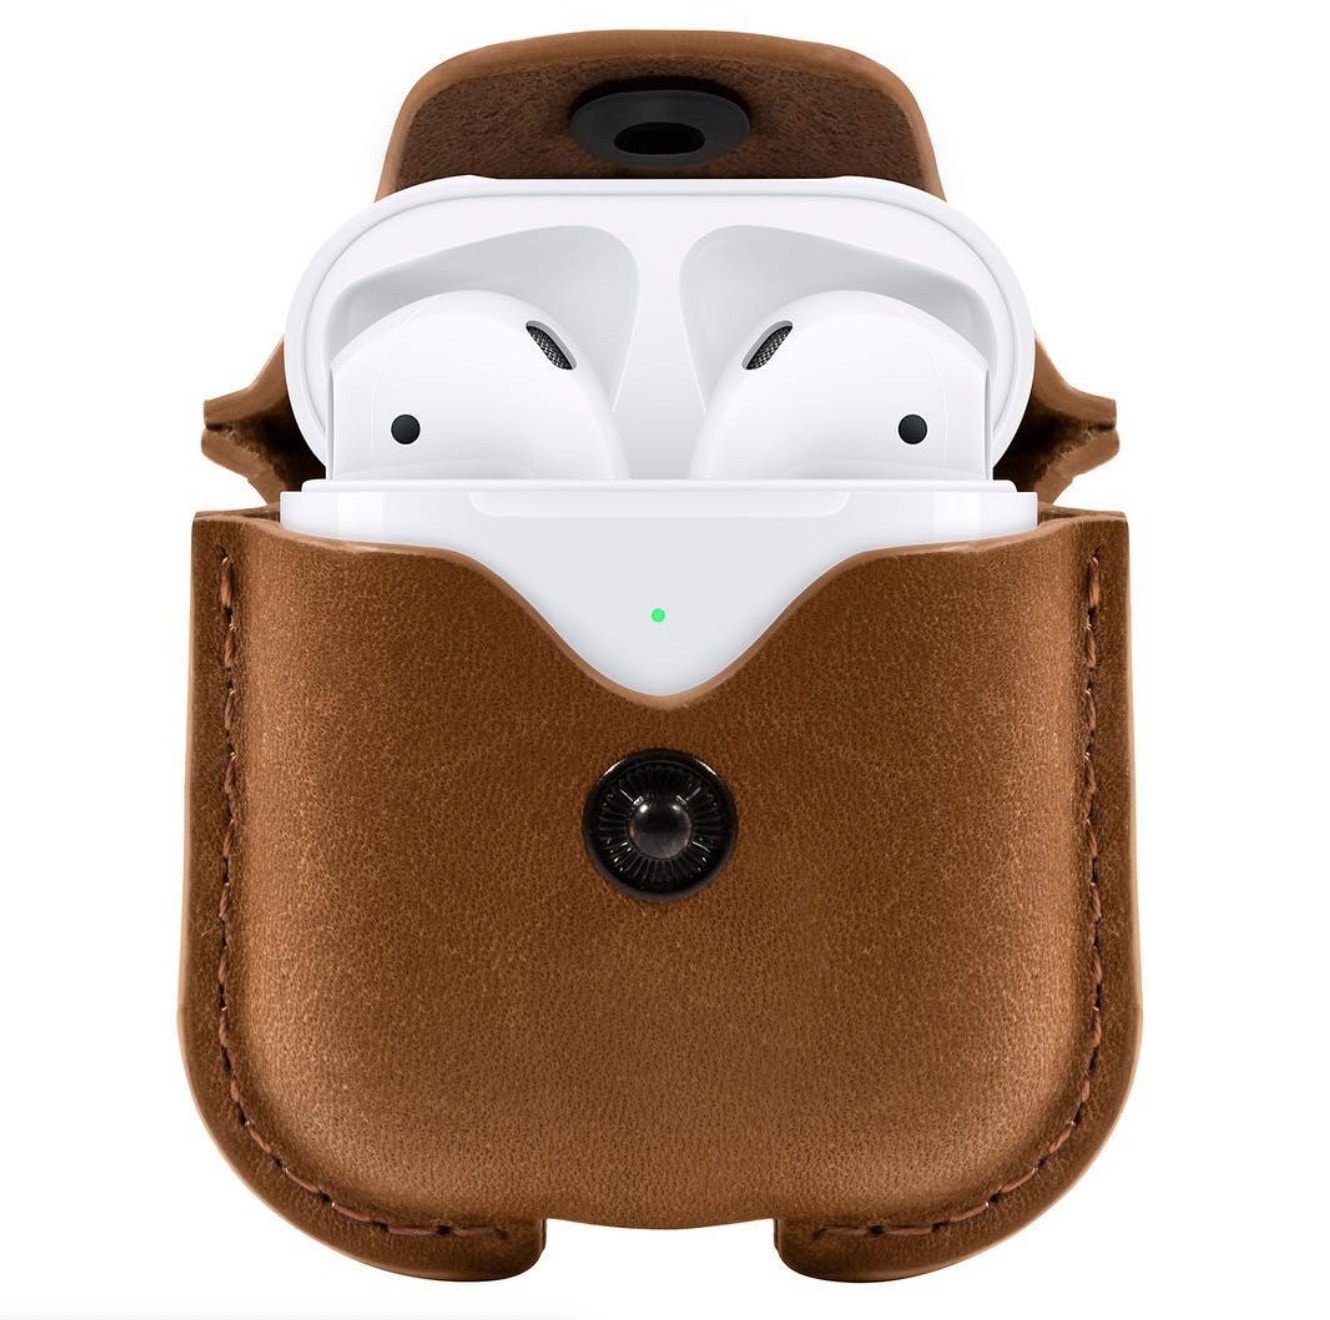 AirSnap protects both your AirPods and charging case from getting nicked, but it also shields them from scratches, dirt, and drops while floating around your desk, computer bag, or purse.